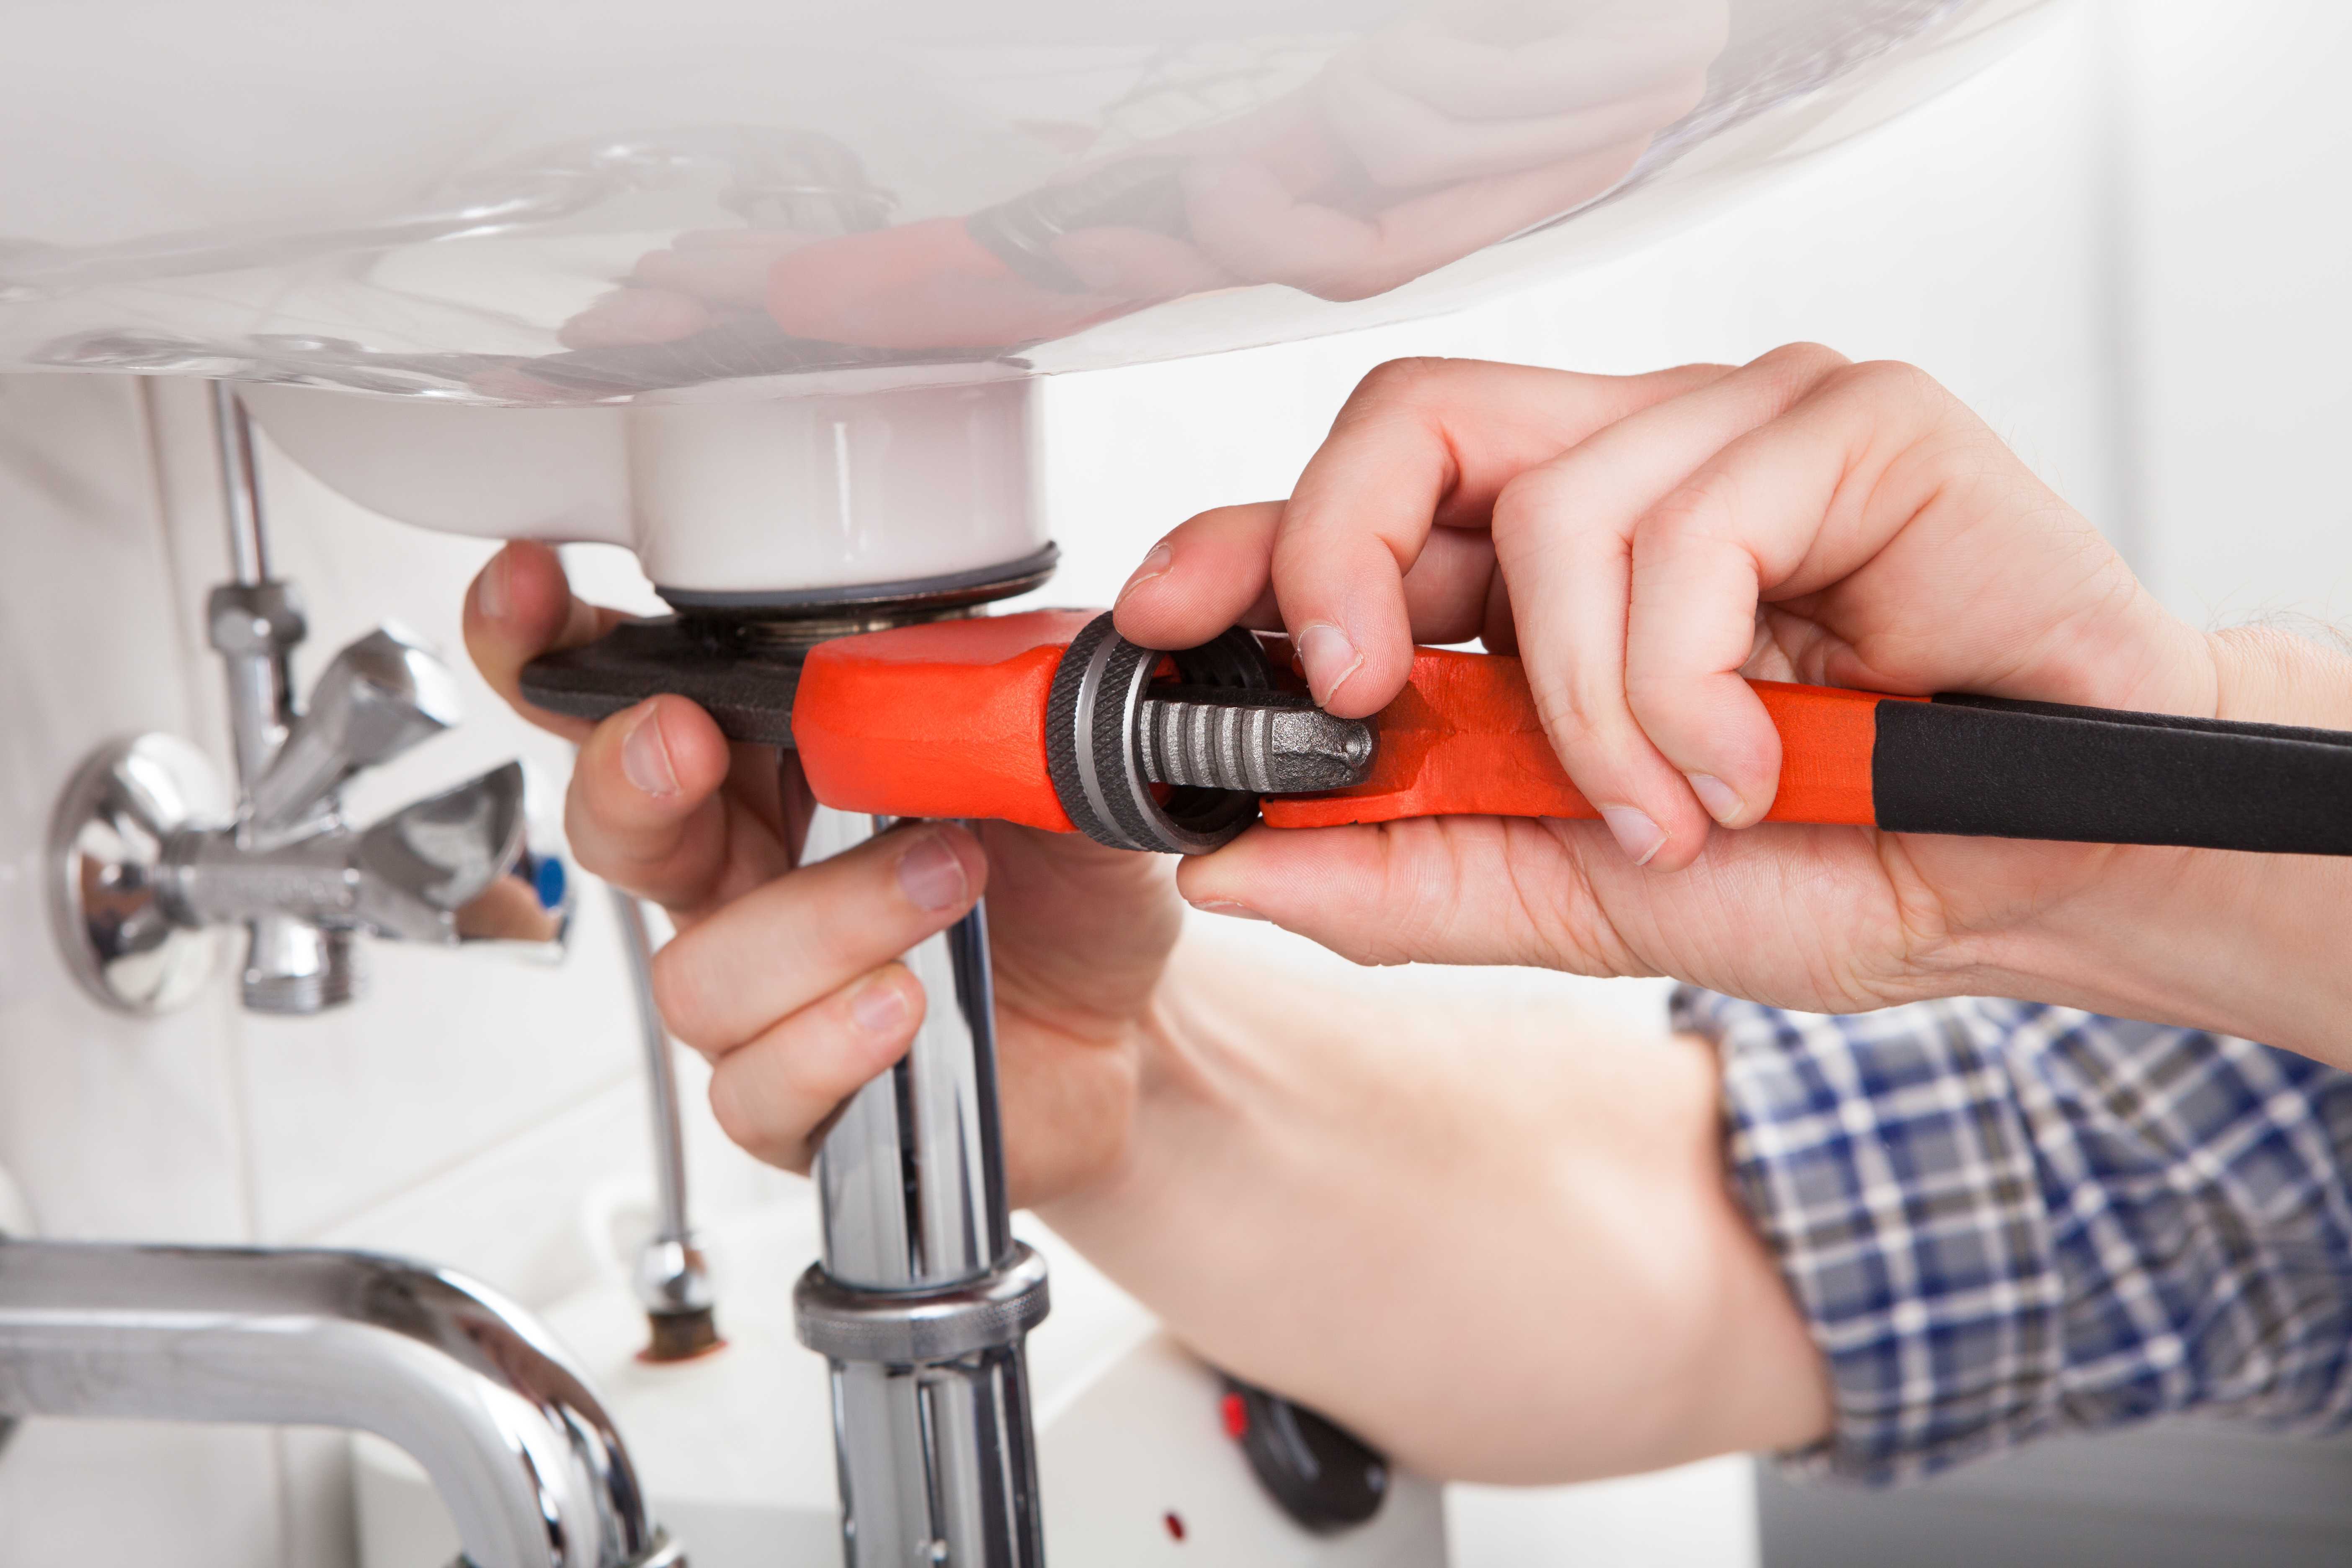 Professional Plumbers for Complete Plumbing Services